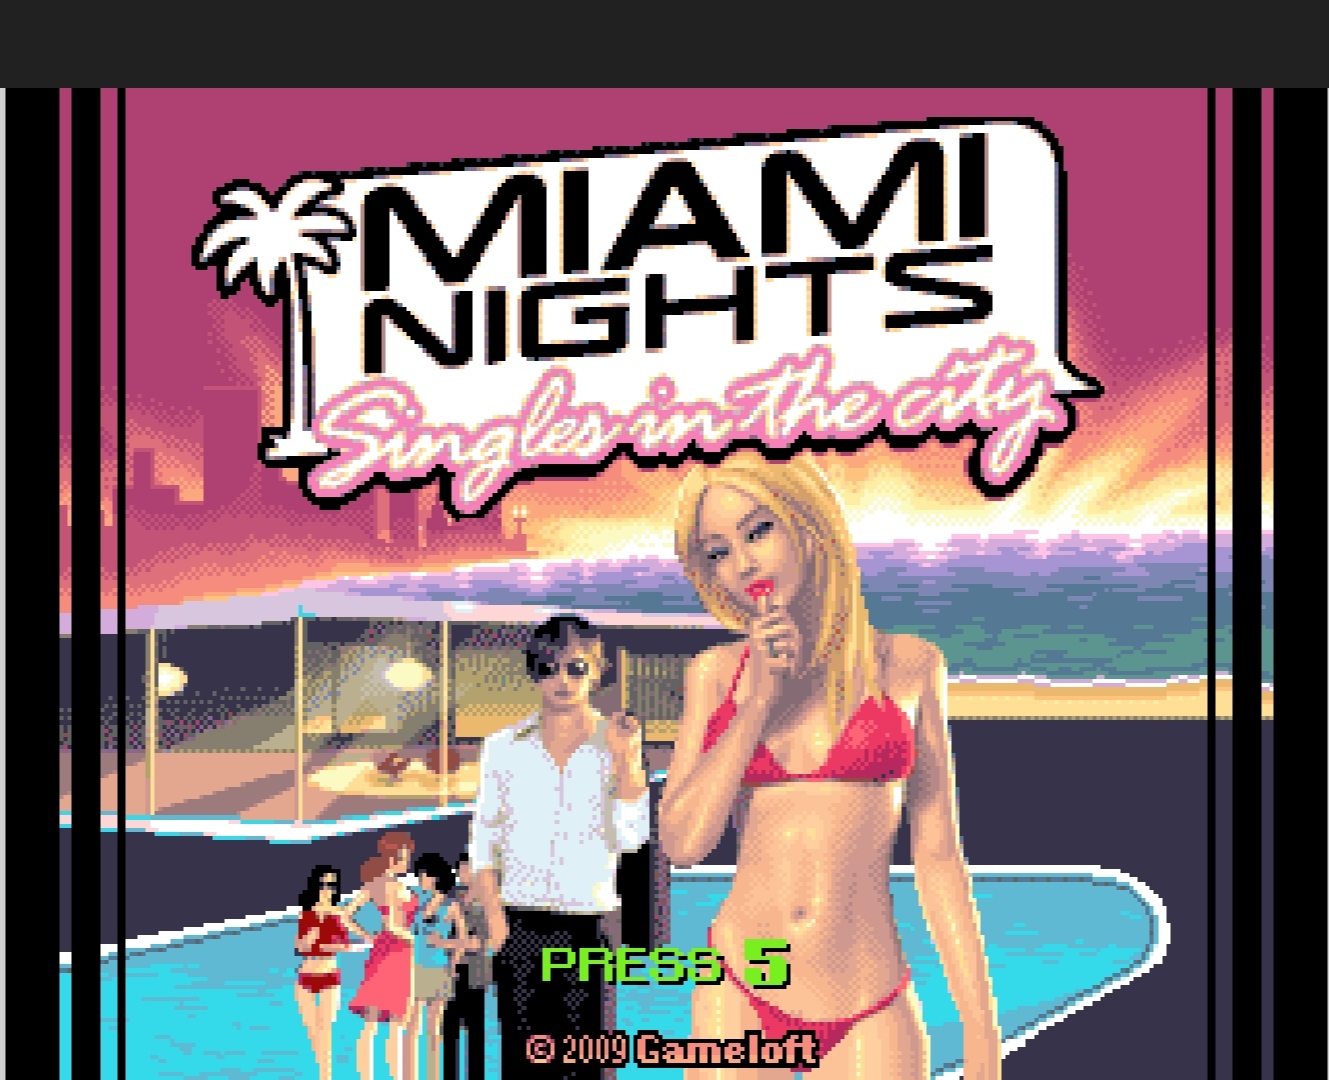 [SP Hack] Miami Nights Single In The City Hack Full 999999999 Tiền By Bakuryu